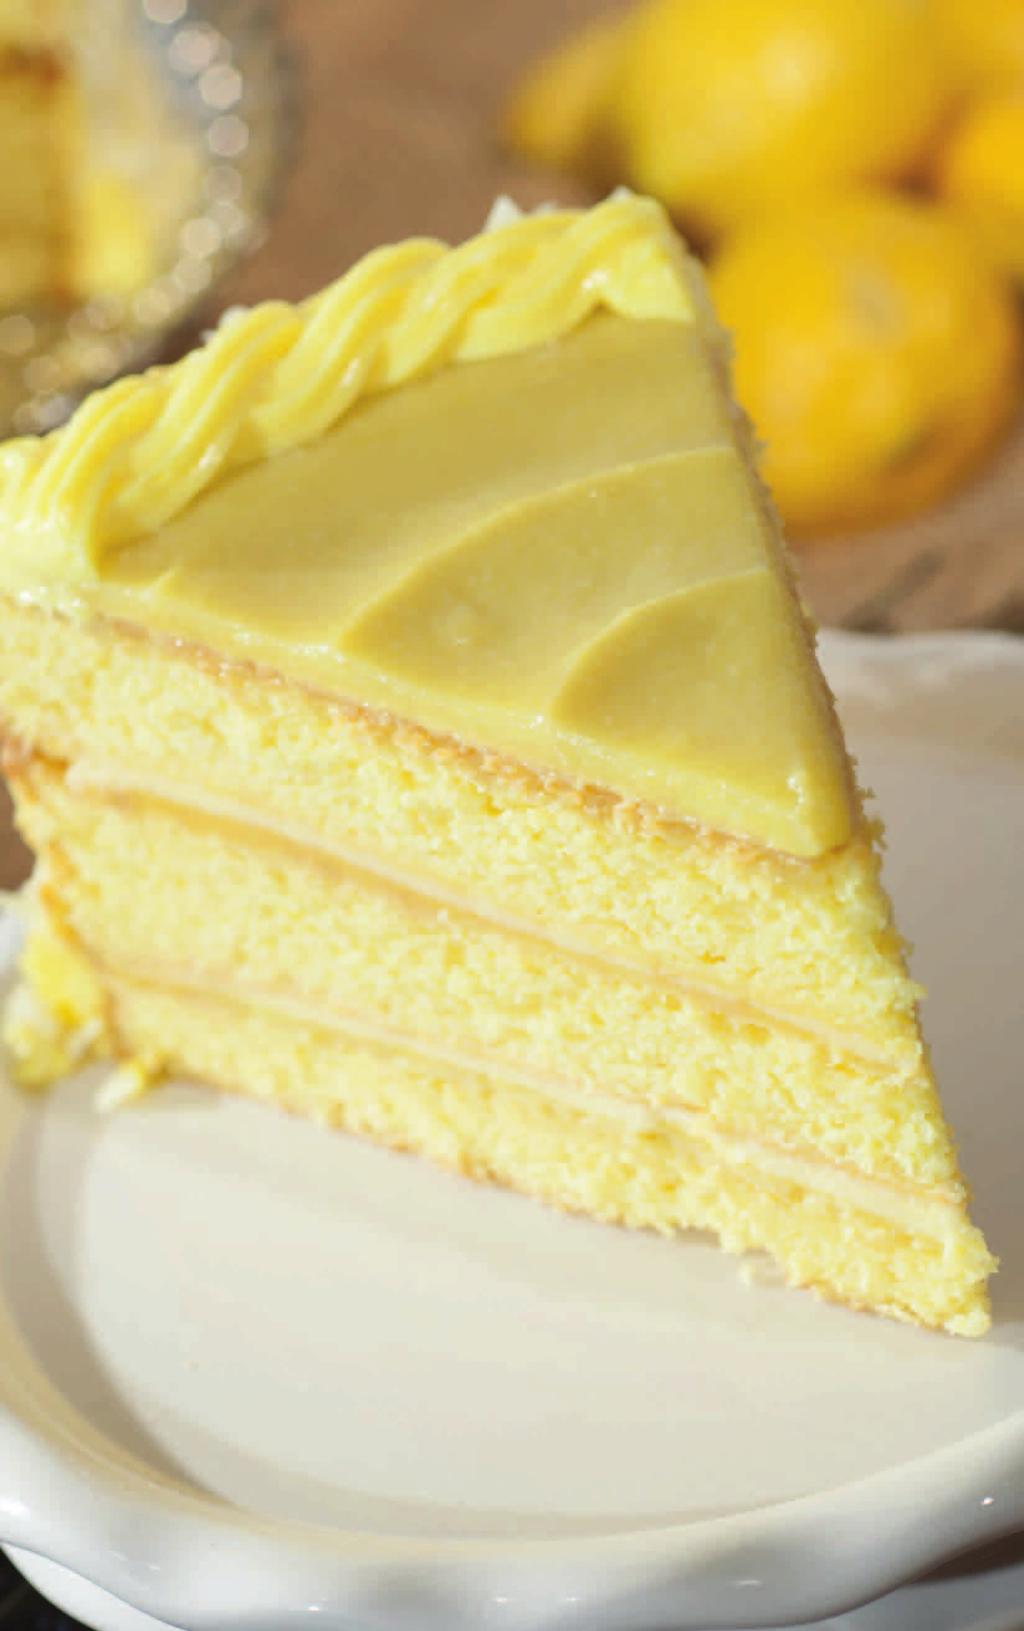 MOLLY S LEMON LAYER CAKES This best seller is baked with fresh Florida lemon juice poured into each